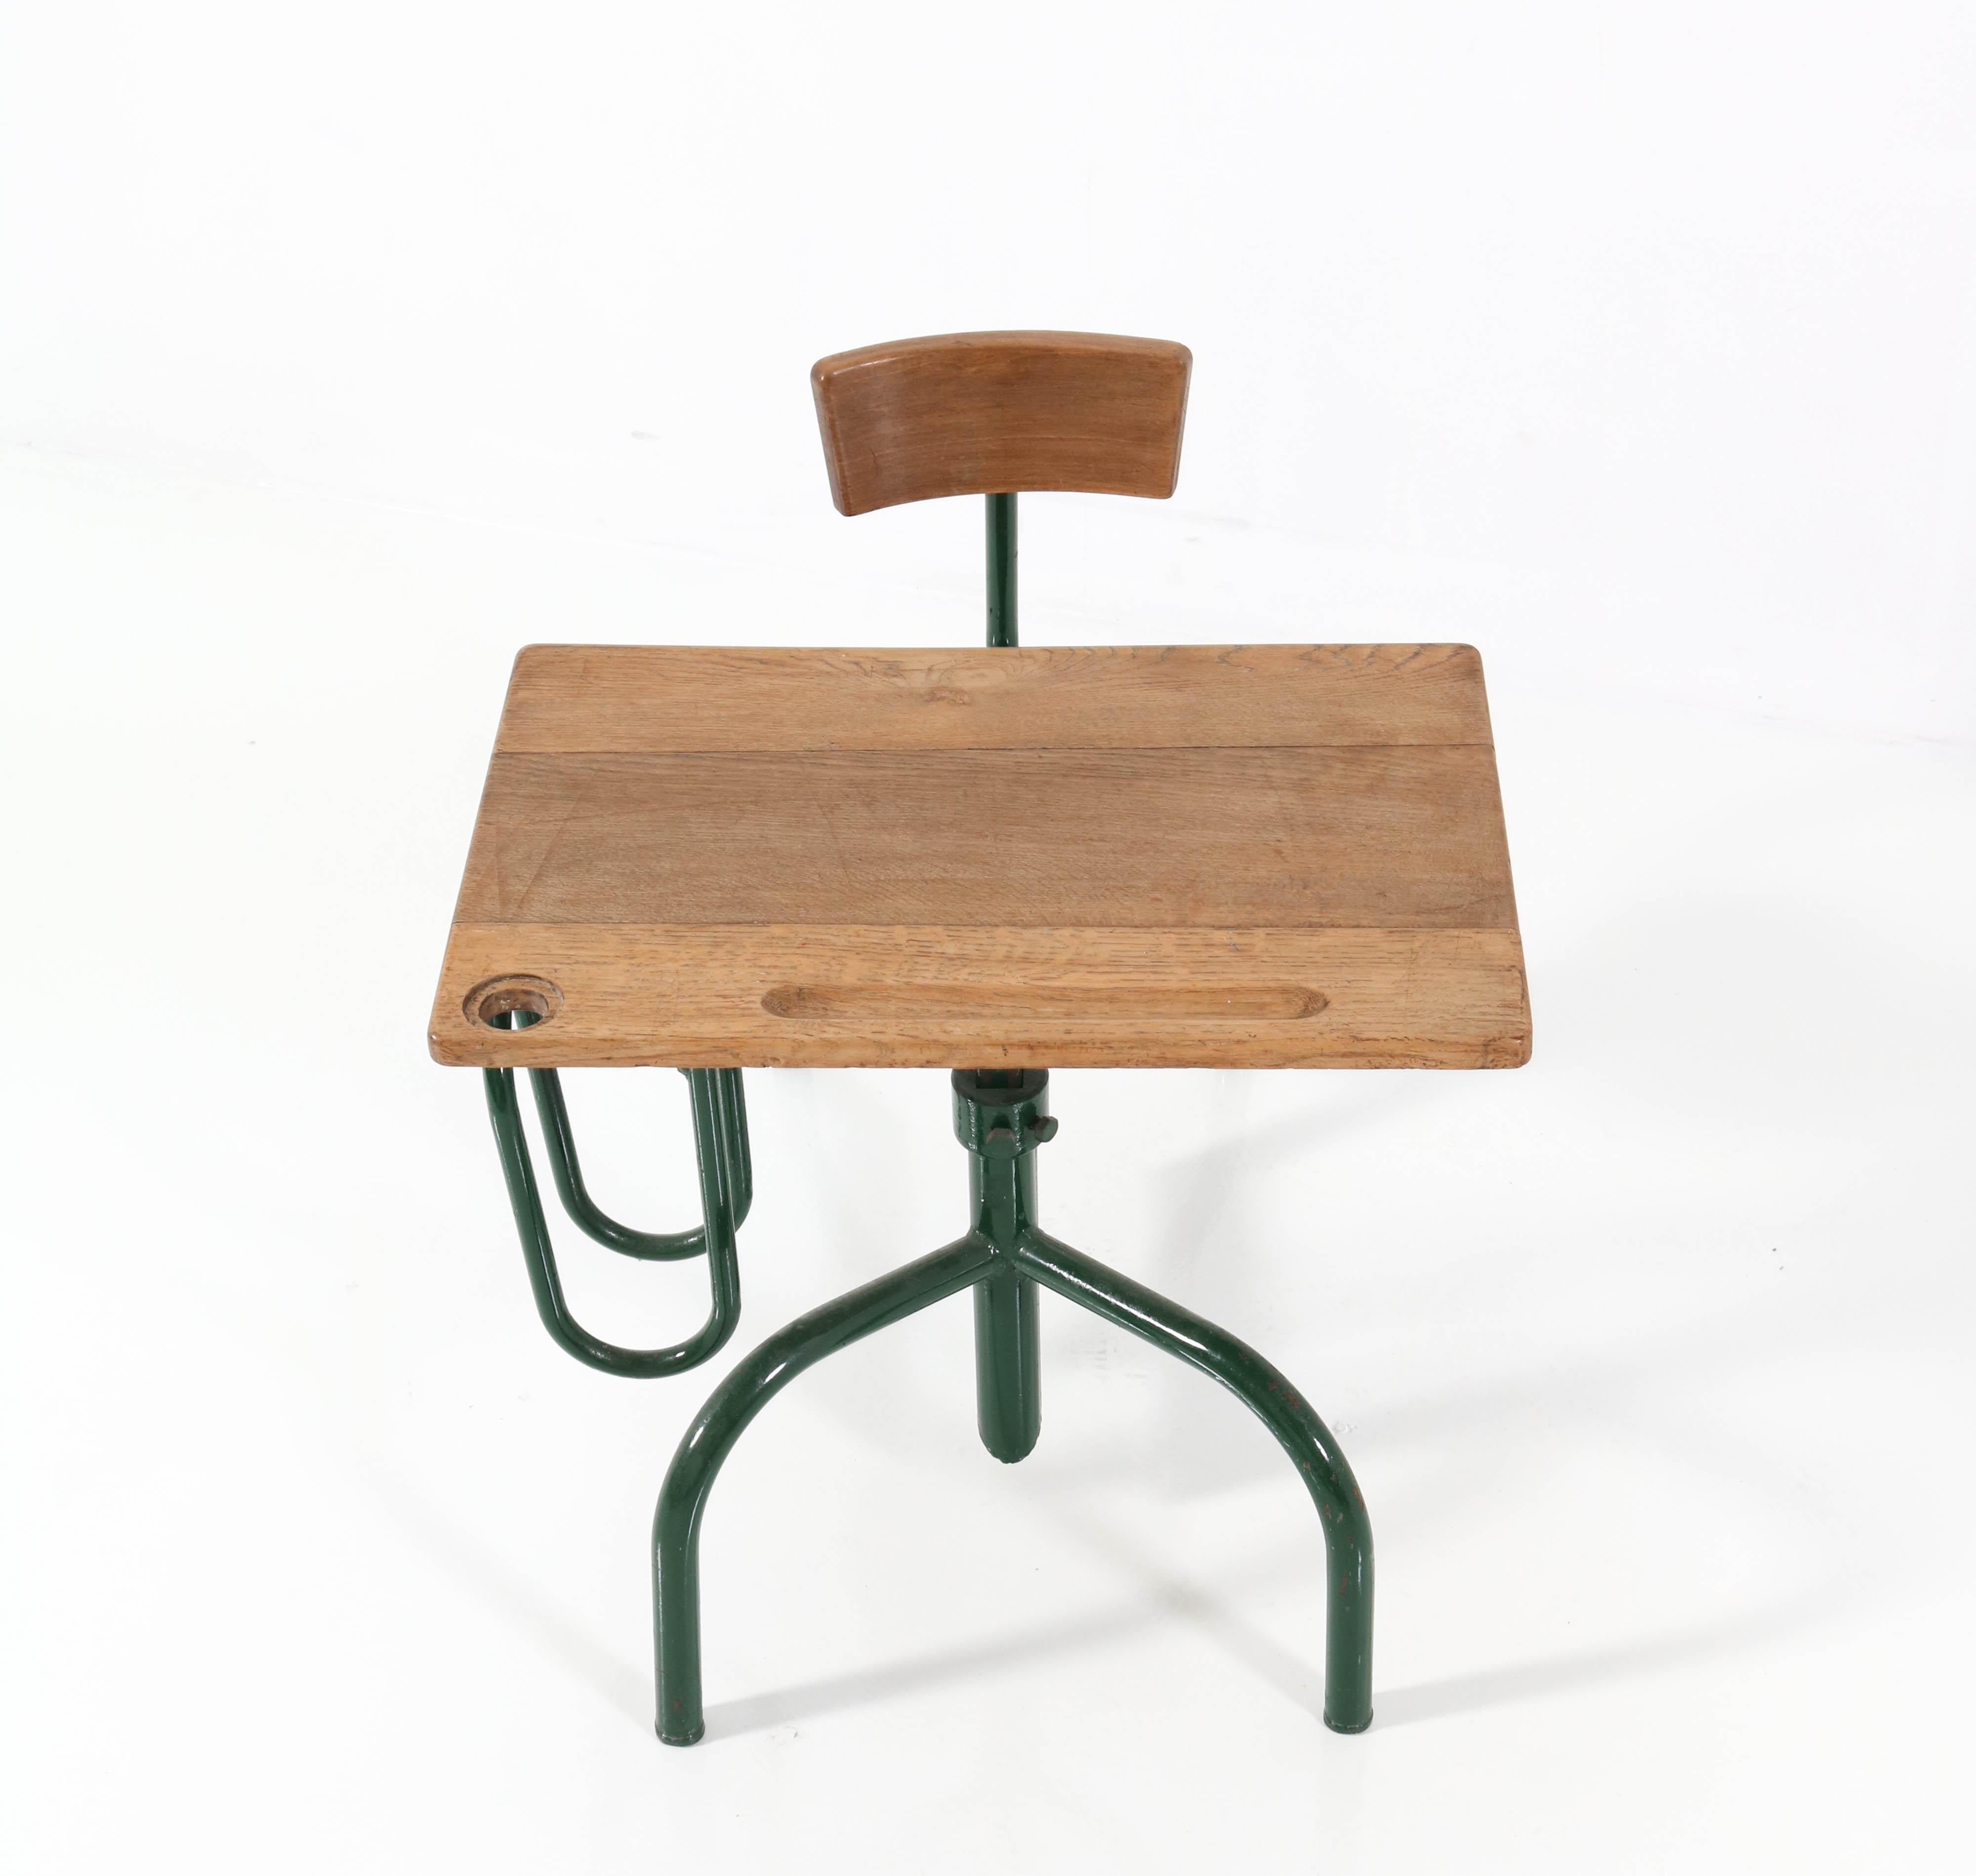 vintage metal school desk with attached chair